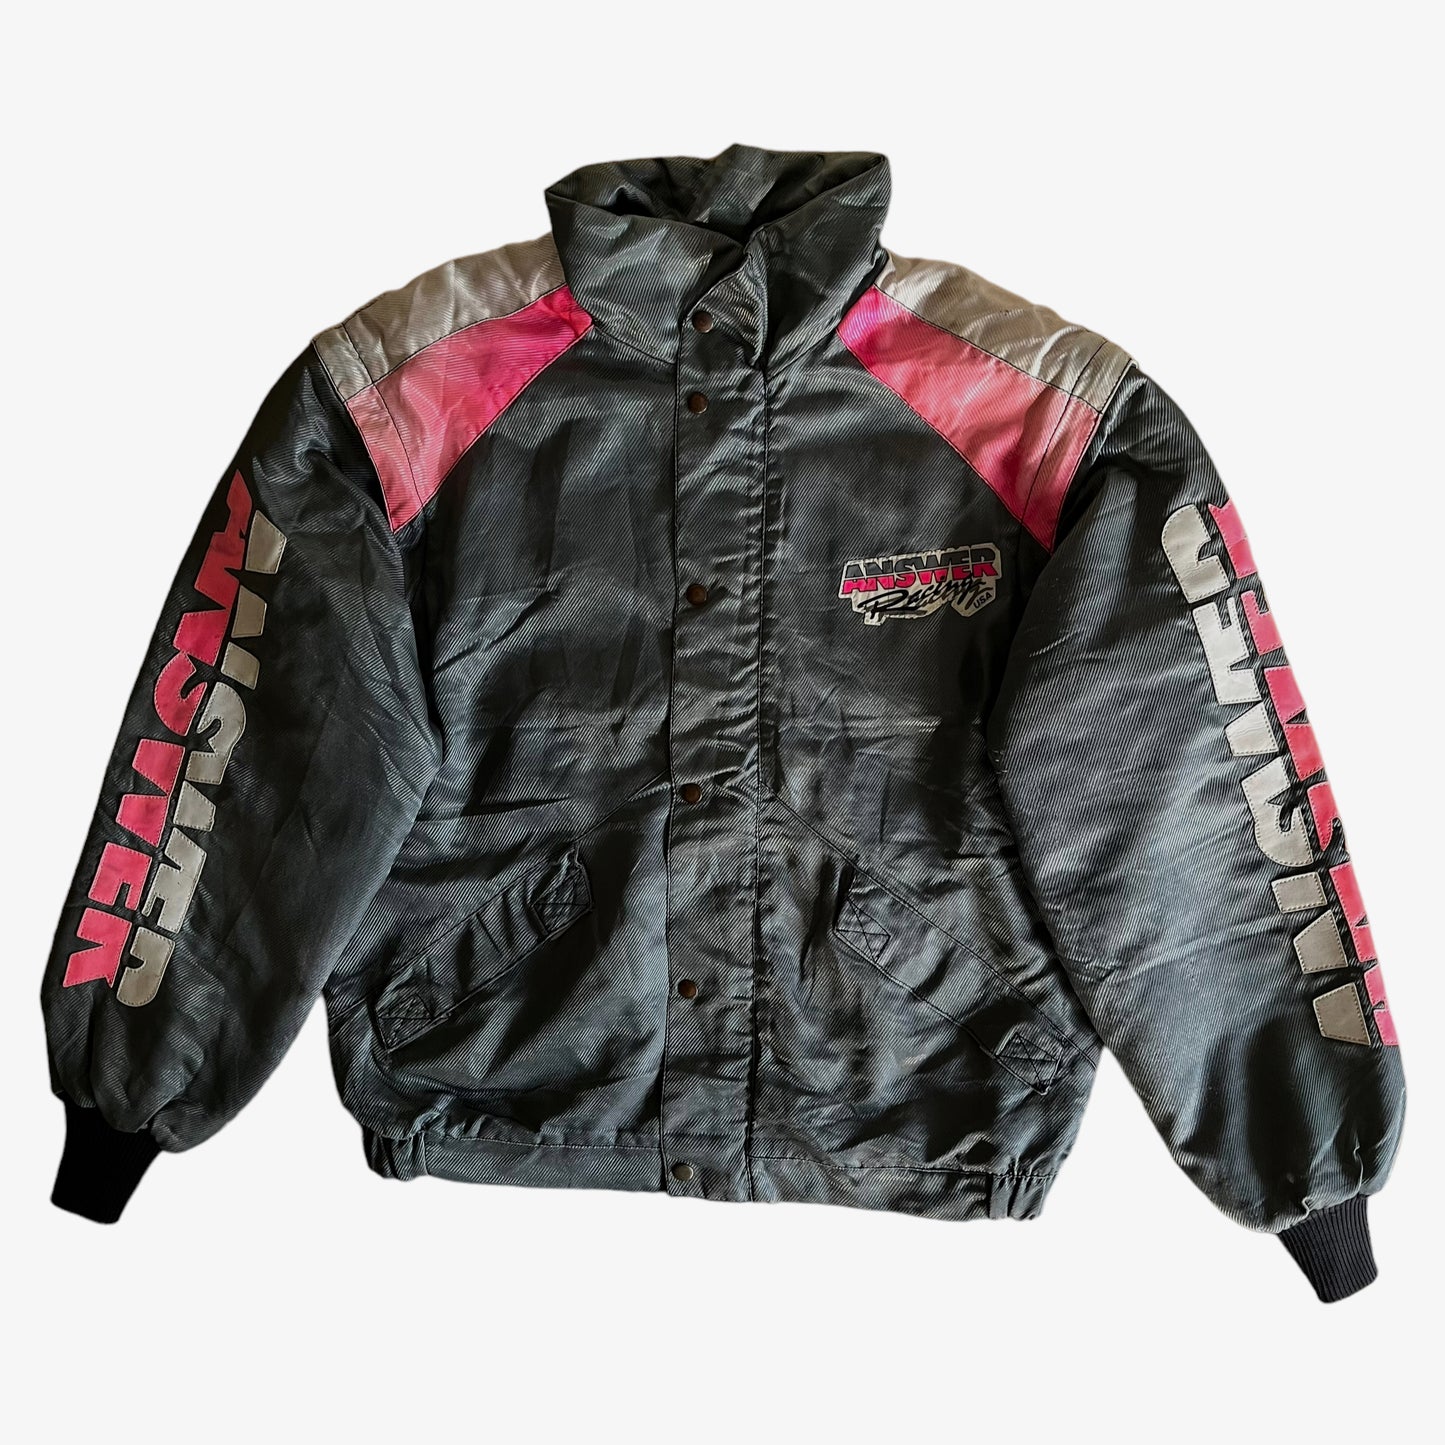 Vintage 90s Answer Racing Spell Out Jacket - Casspios Dream